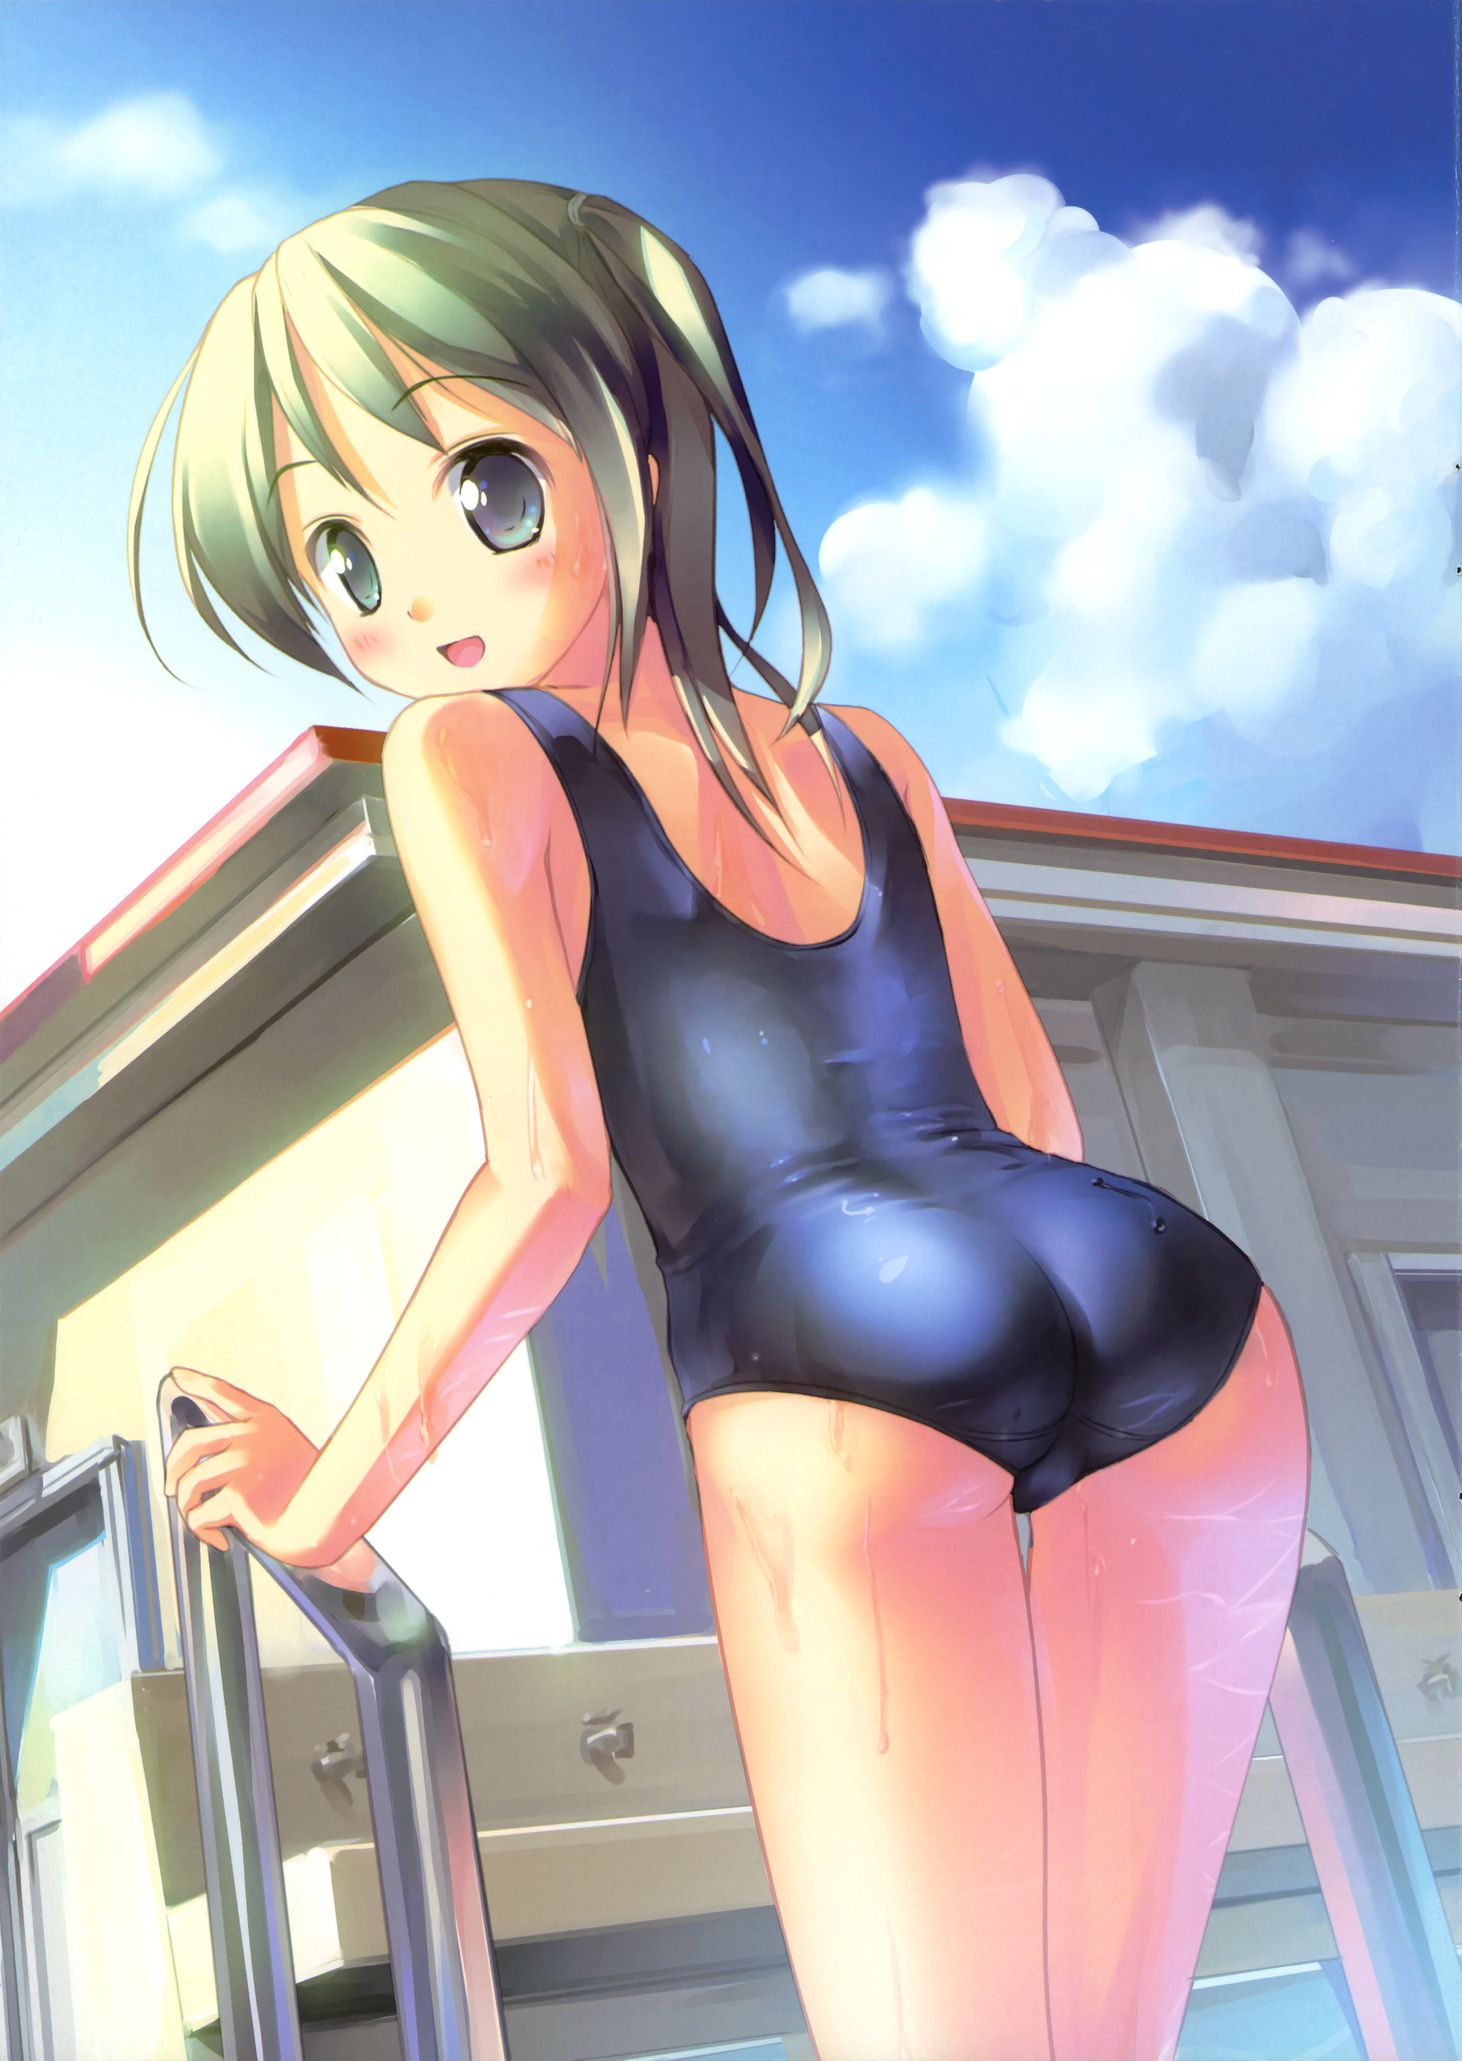 Many h two-dimensional girls attracted the sight picture. Vol.9 52